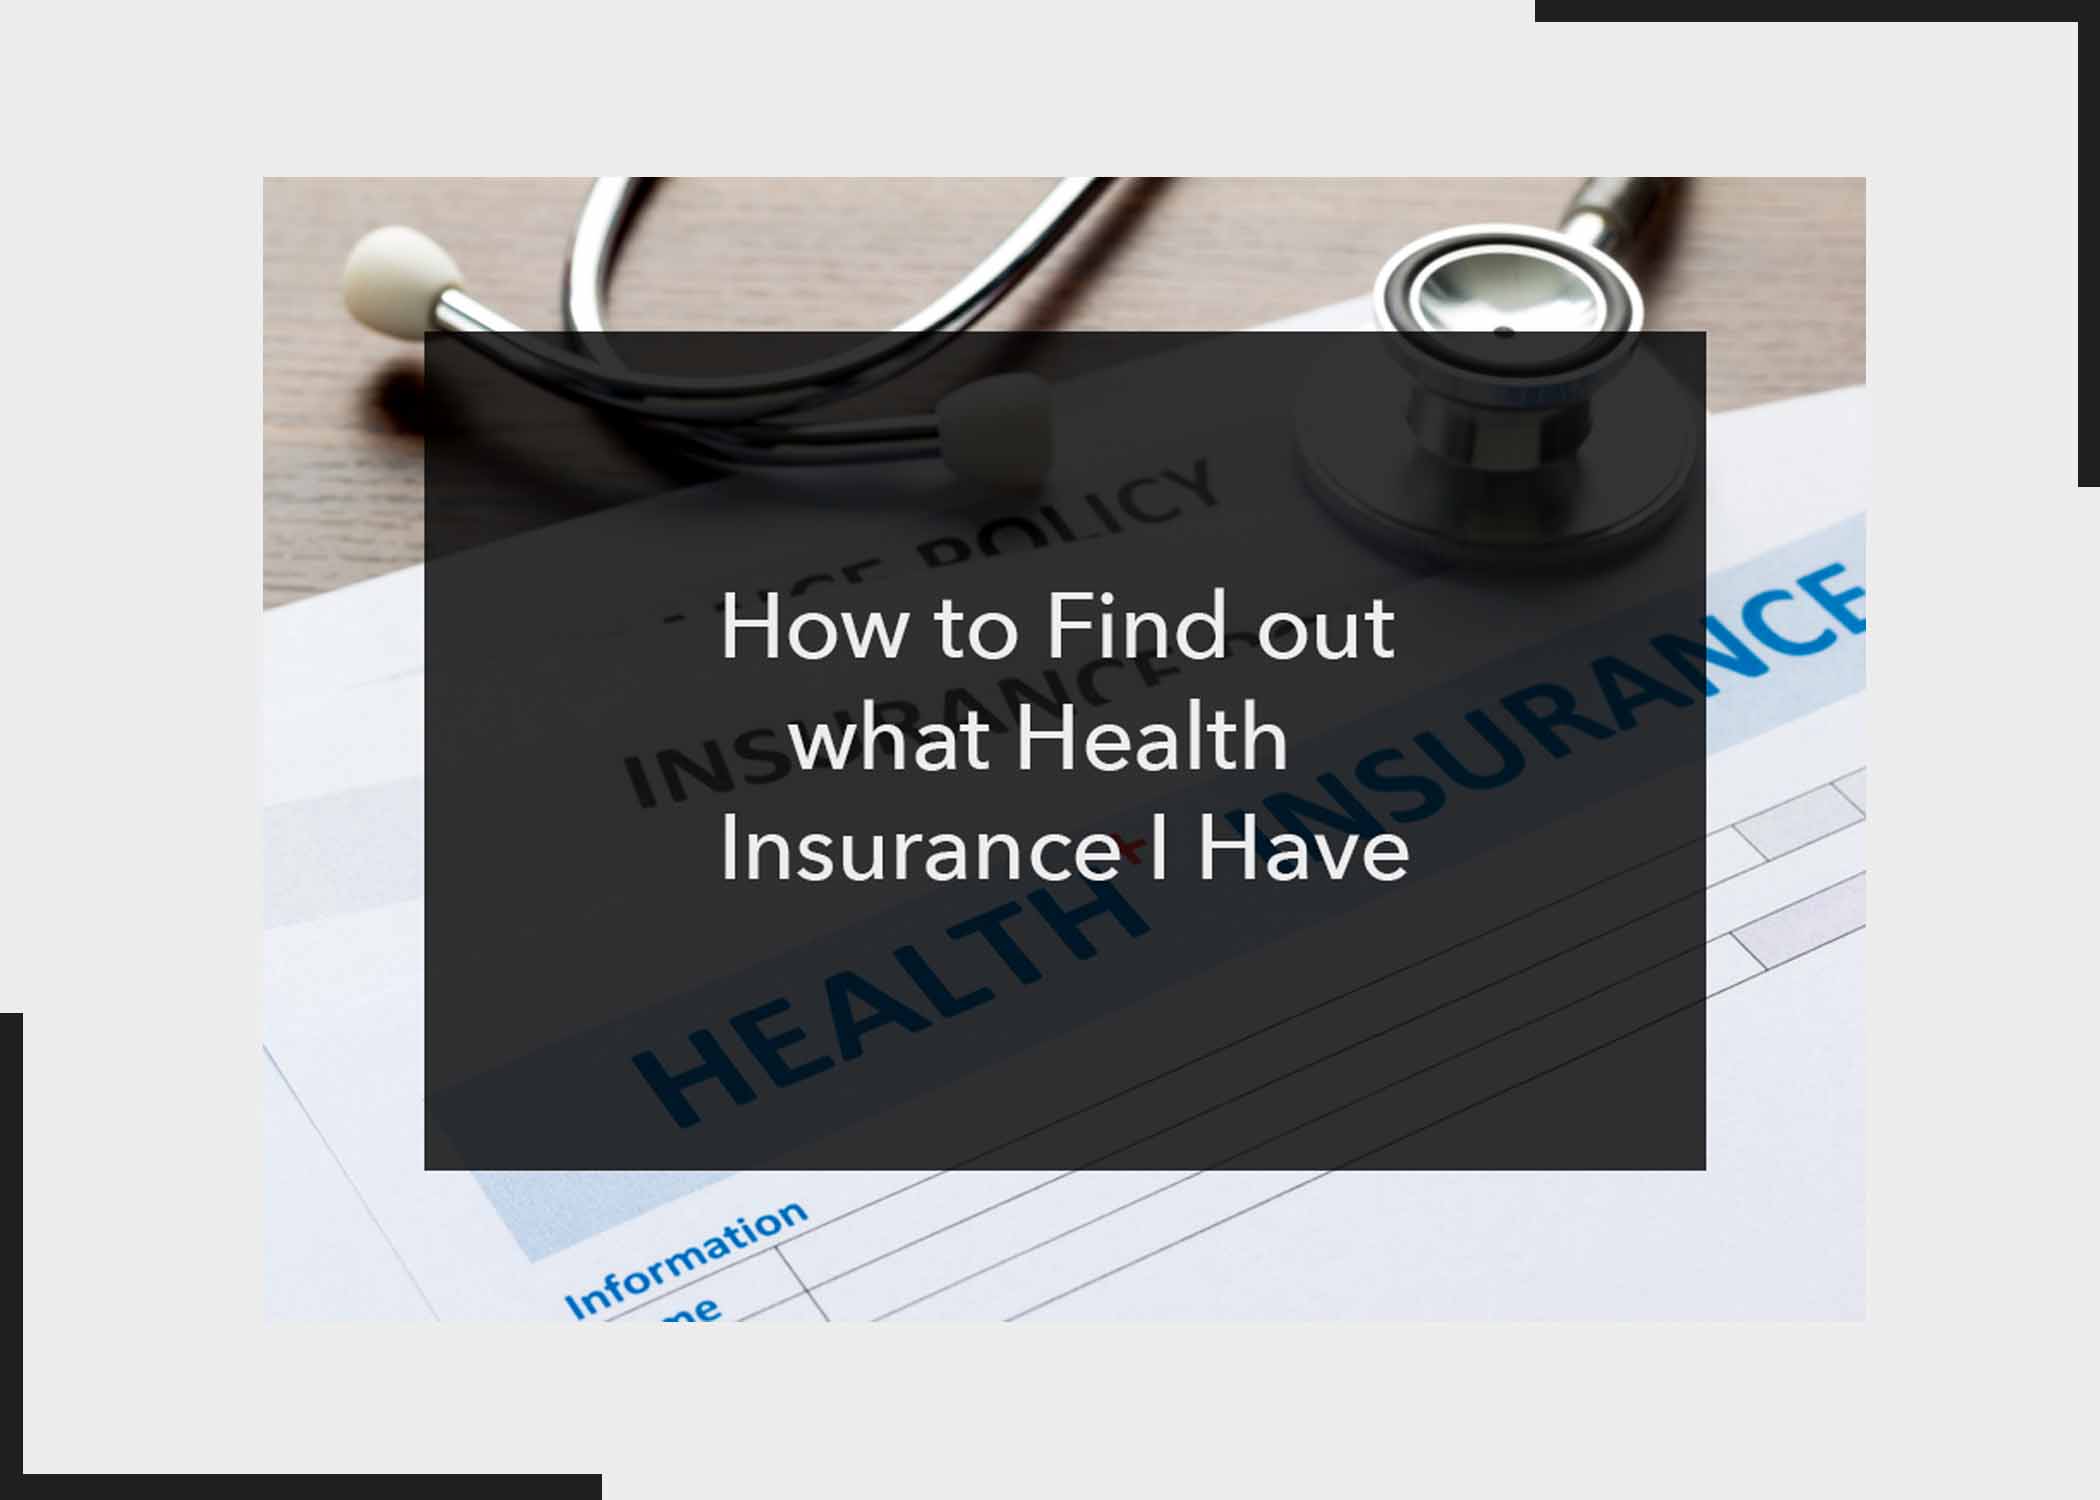 How to Find out what Health Insurance I Have